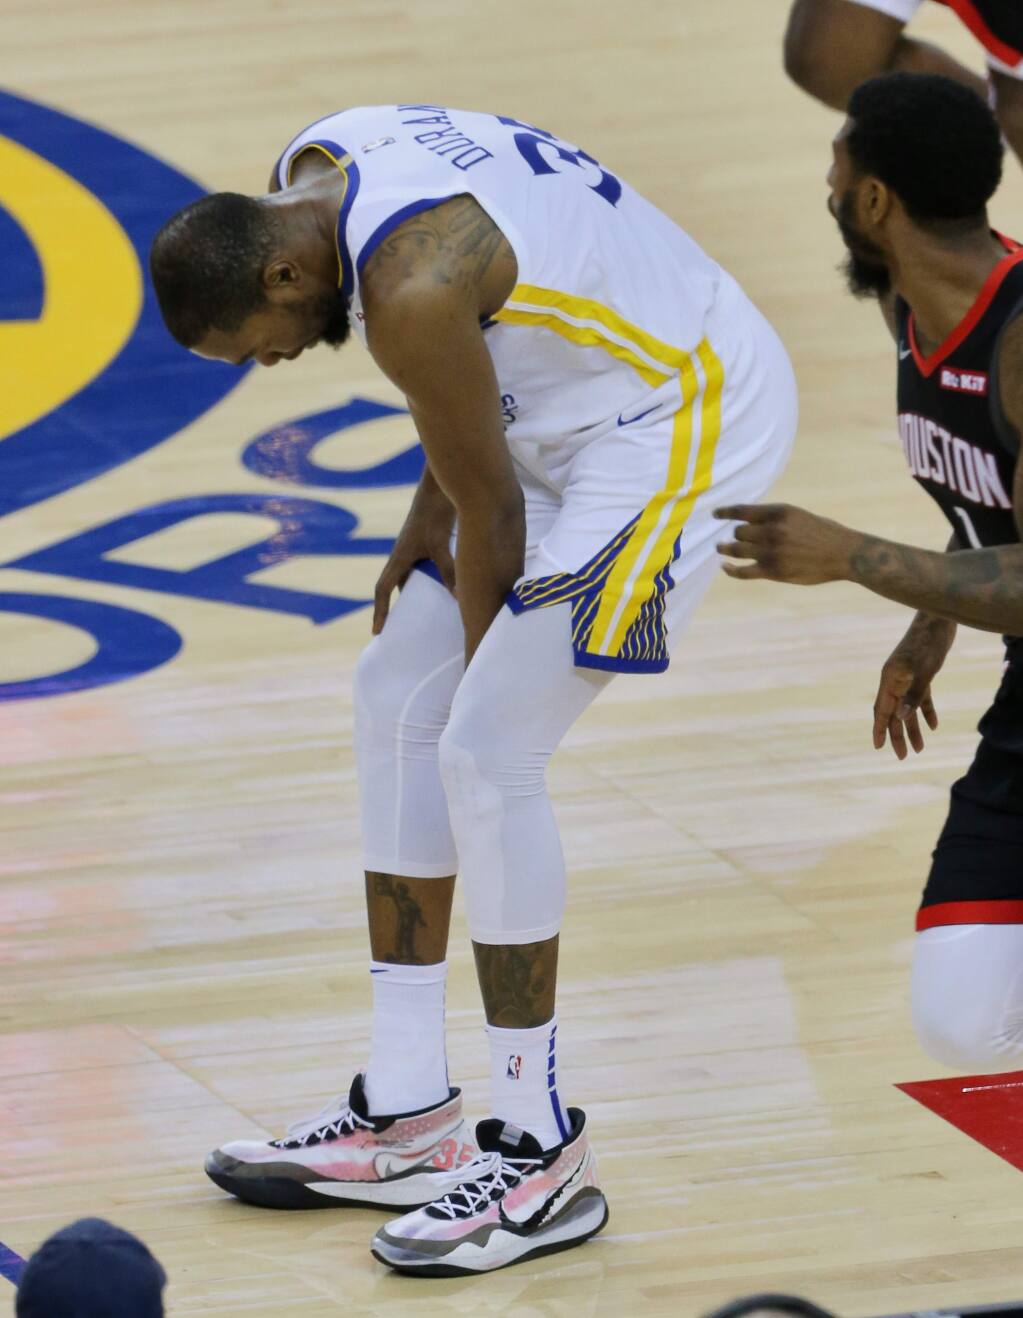 Kevin Durant's calf injury 'more serious than we thought,' Warriors coach  says